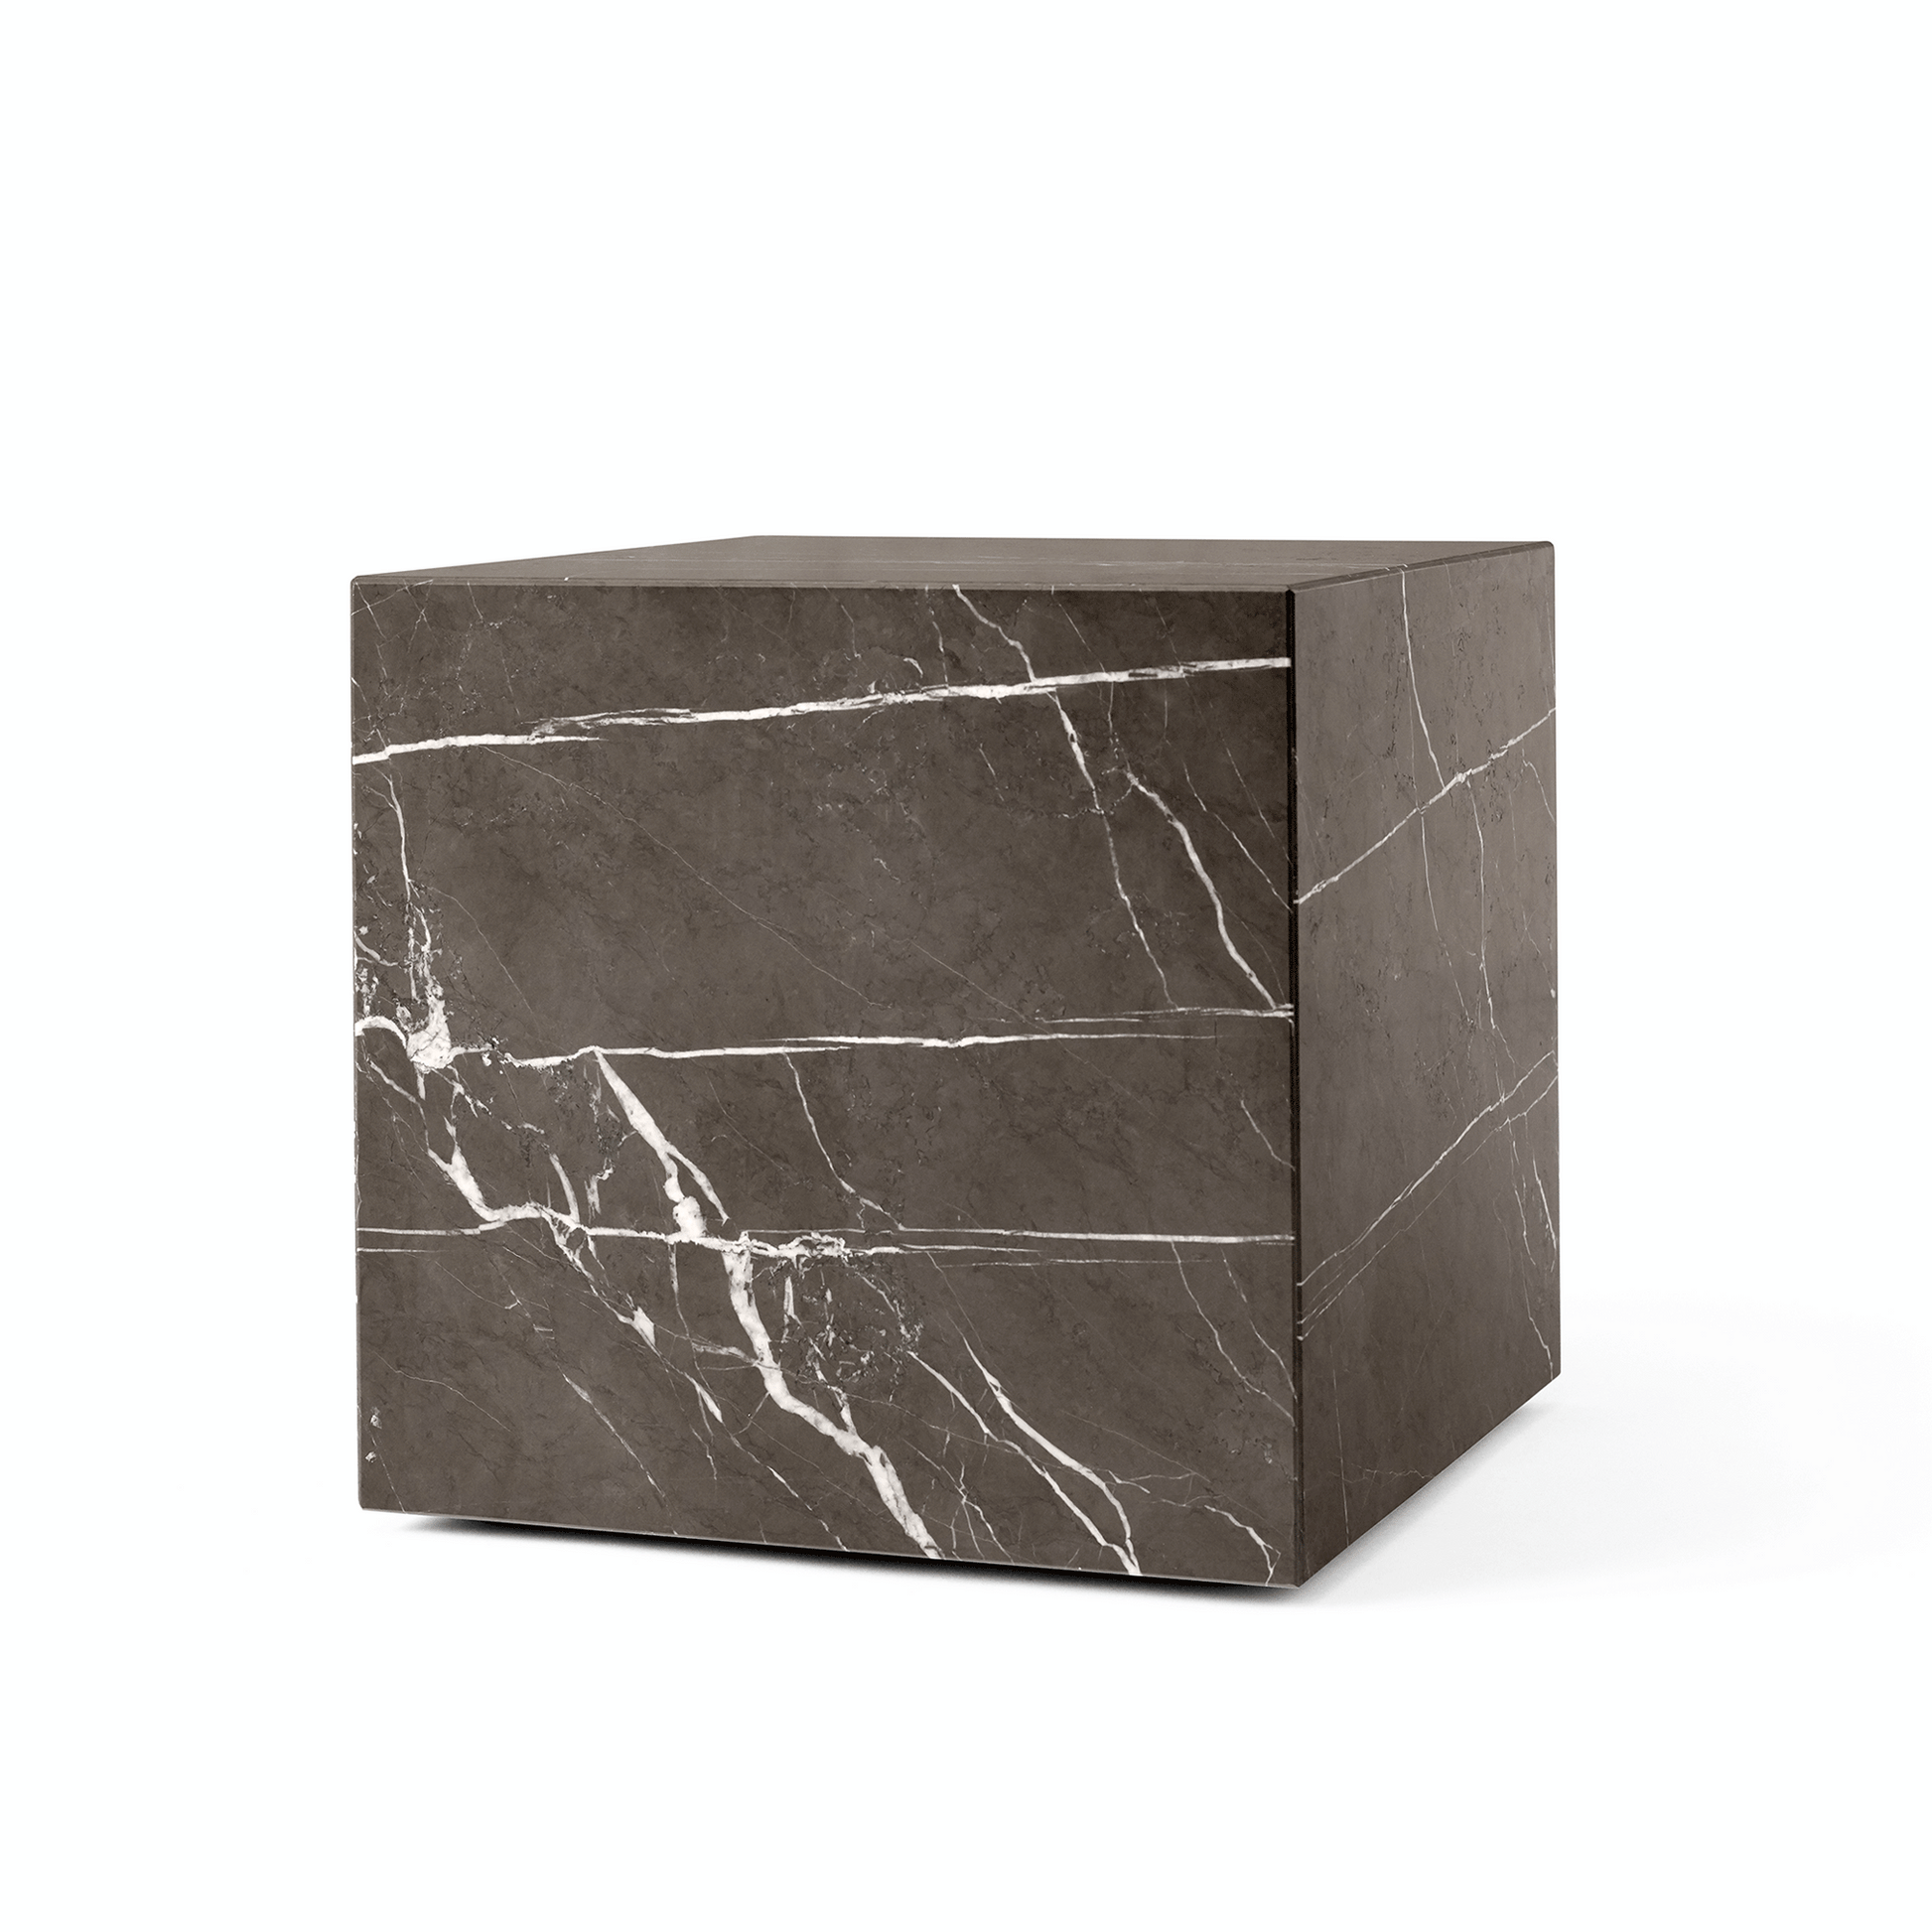 Plinth Coffee Table Cubic by Audo #Gray Kendzo Marble